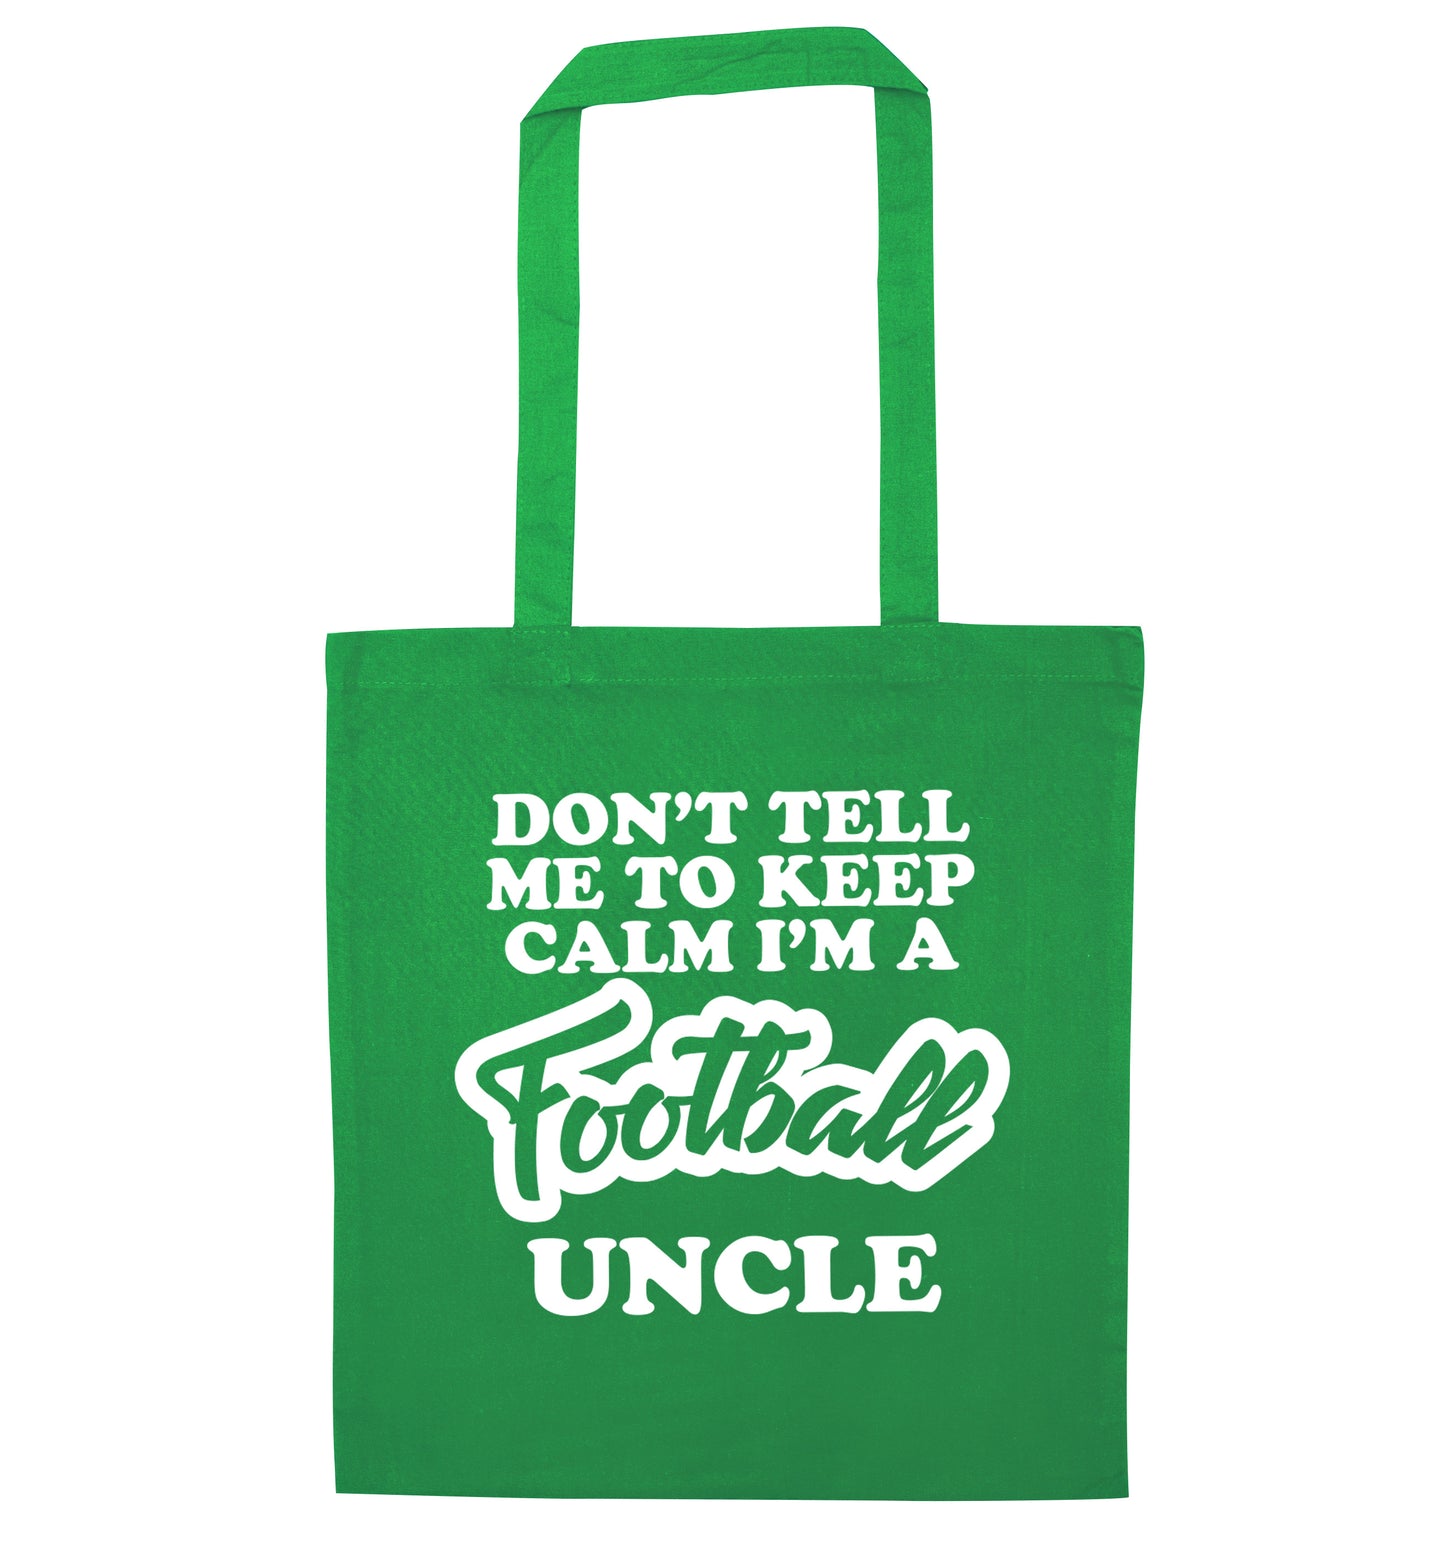 Don't tell me to keep calm I'm a football uncle green tote bag